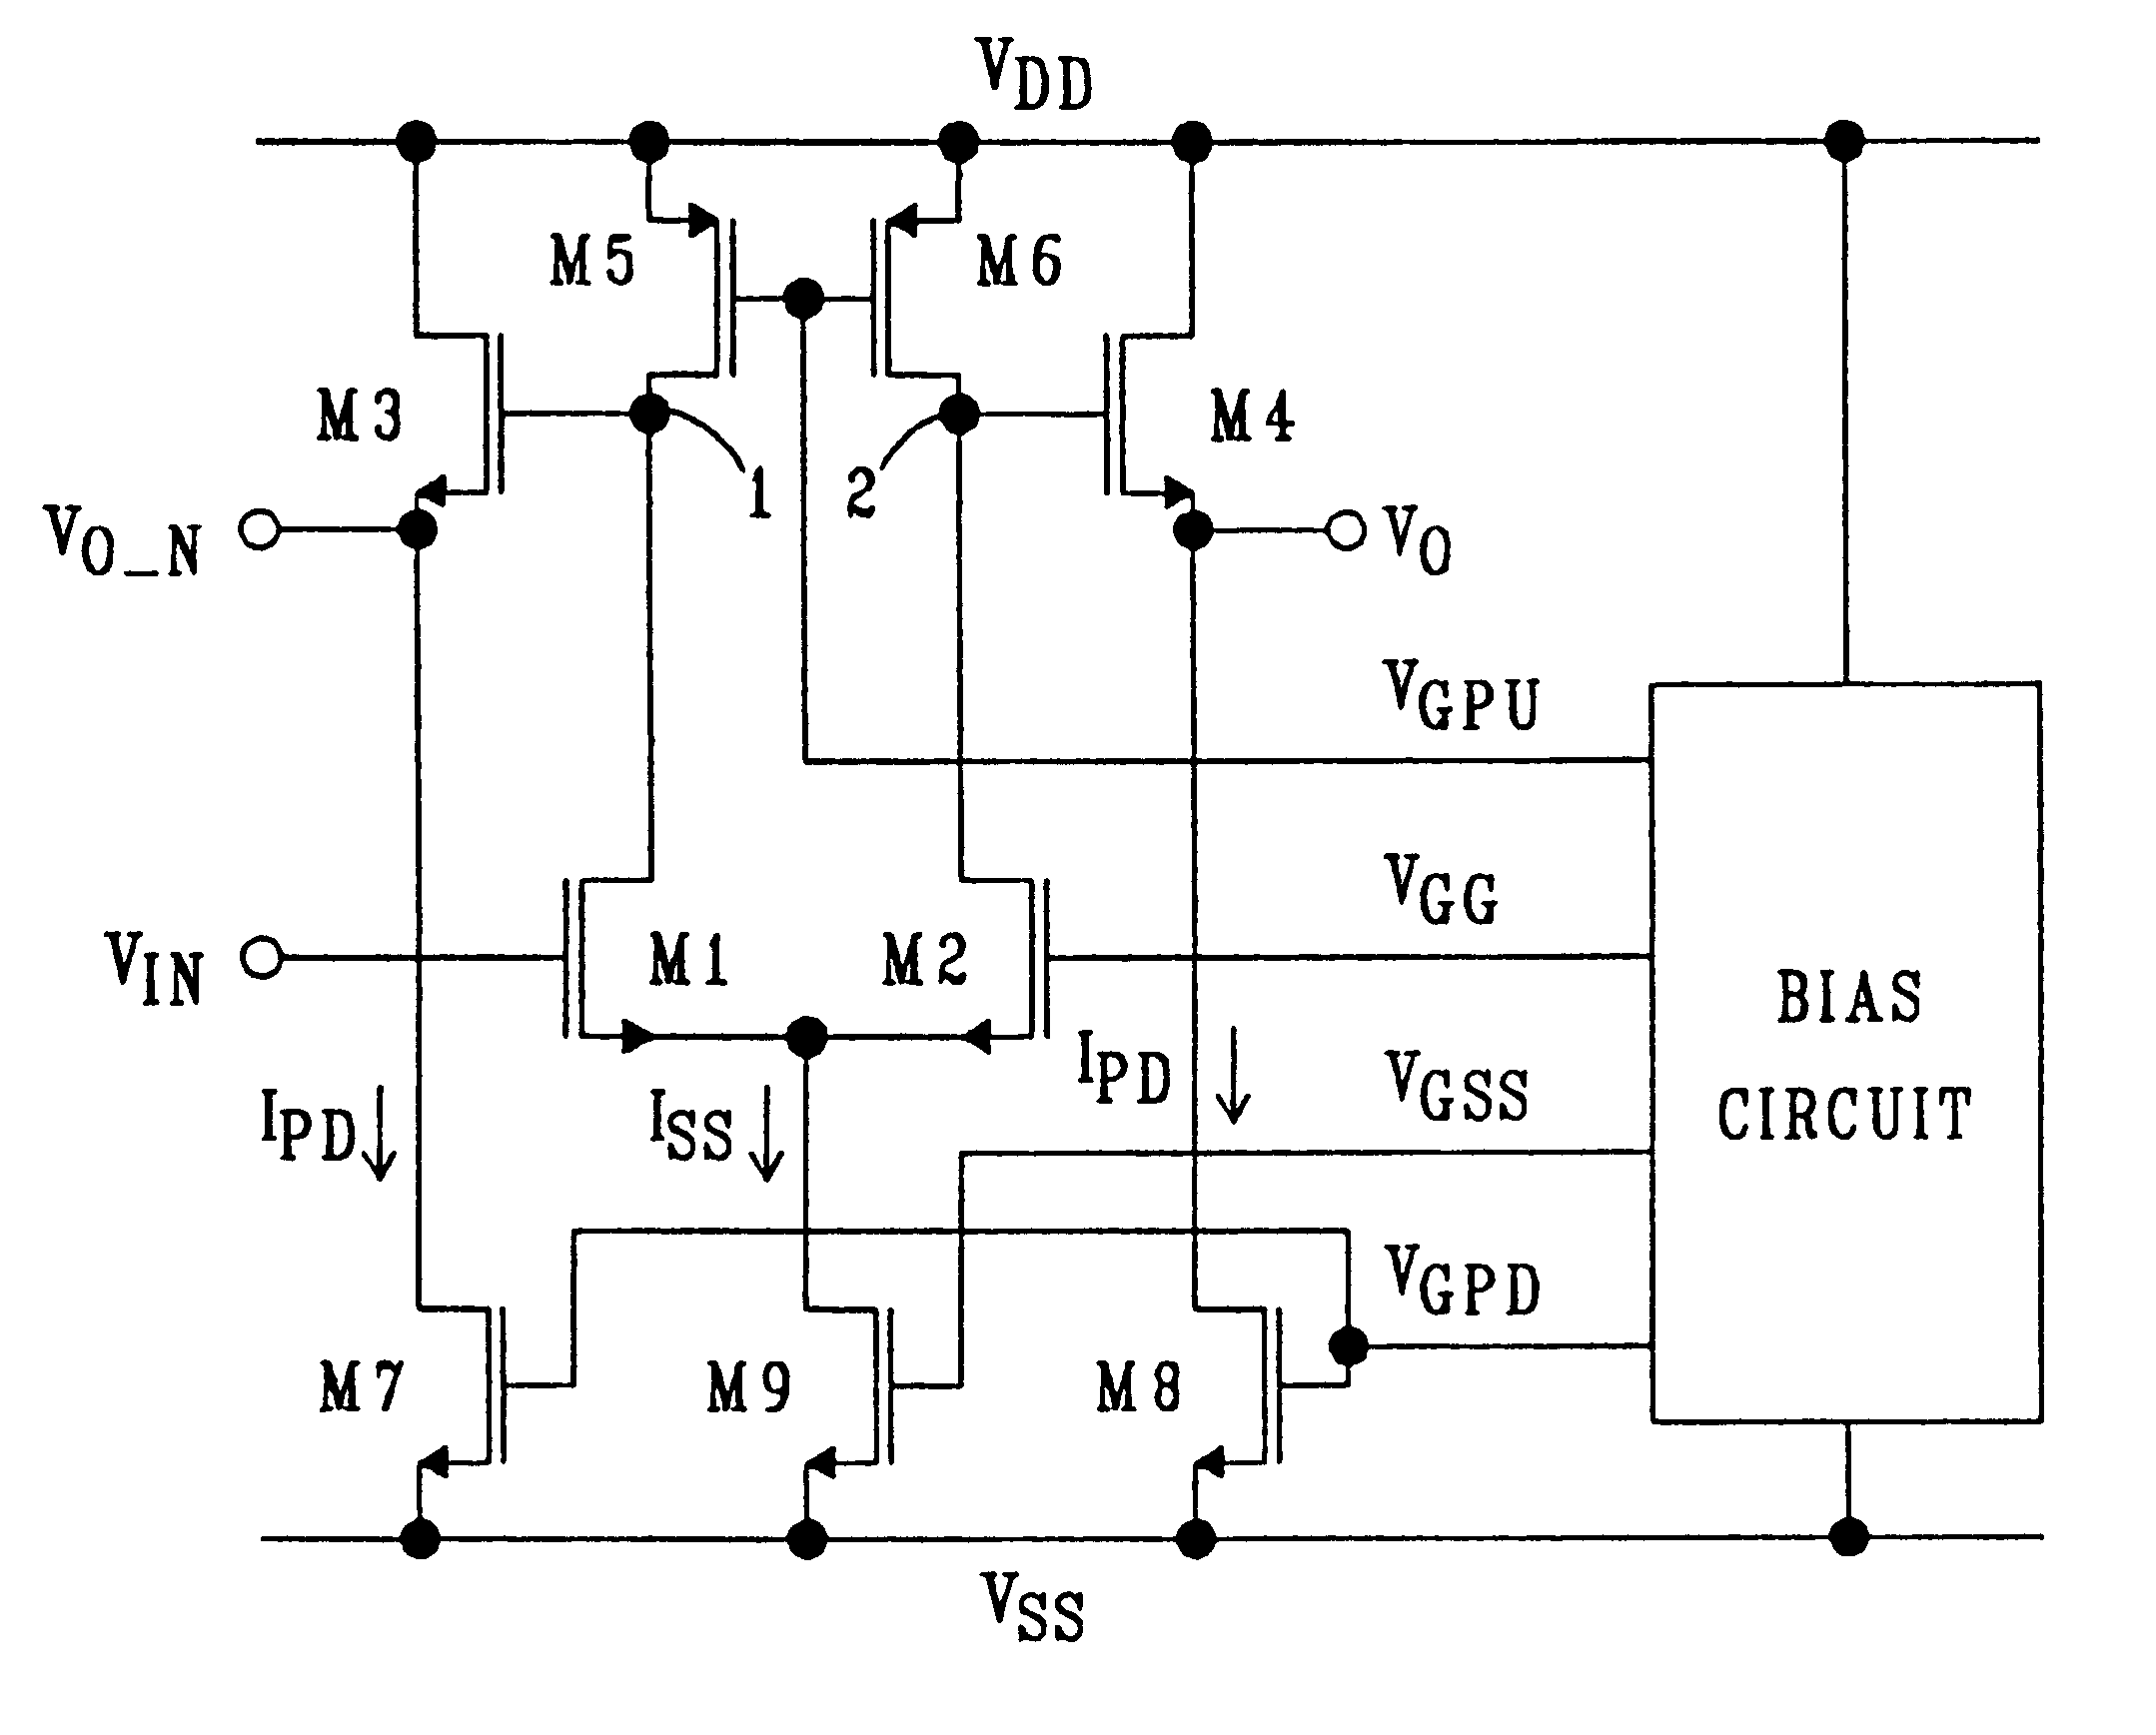 Source-coupled logic with reference controlled inputs